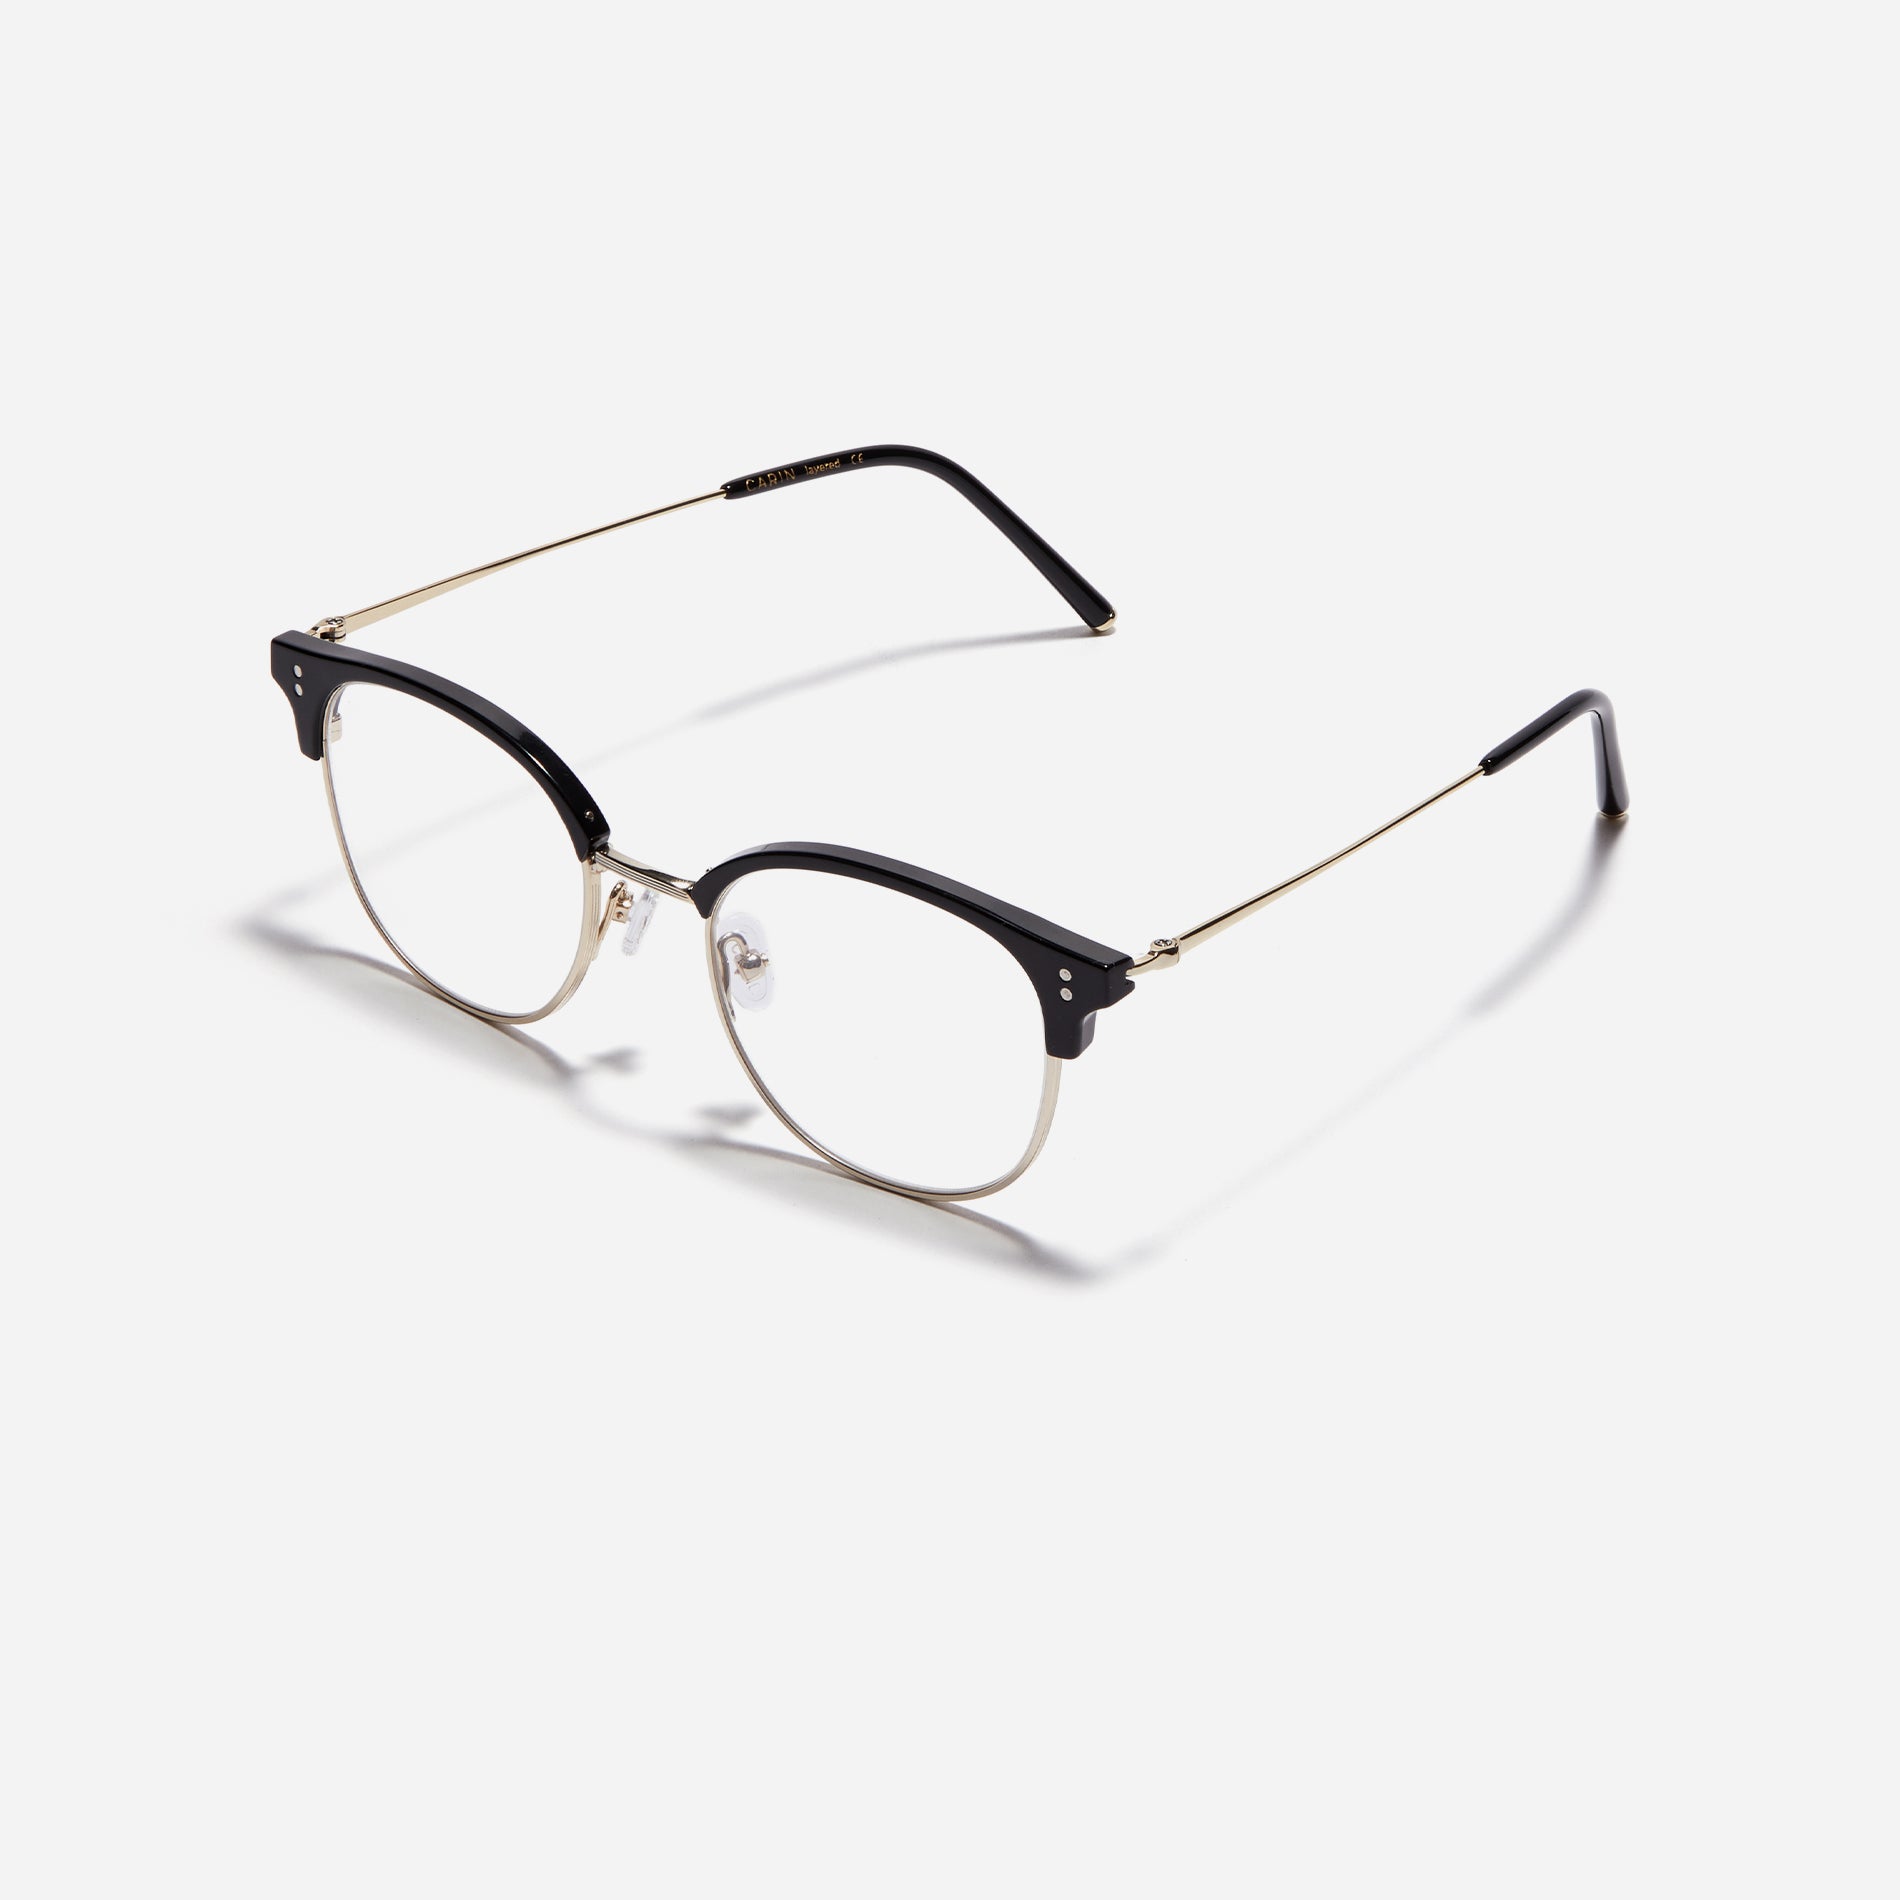 Square-shaped gold-rimmed eyeglasses. The frame, constructed from bioplastic and titanium, seamlessly merges exceptional durability with an ultra-lightweight build, while stylish nose bridge lining details enhance the overall design. The B-titanium temples deliver a lightweight and comfortable fit, guaranteeing prolonged wear without any discomfort.